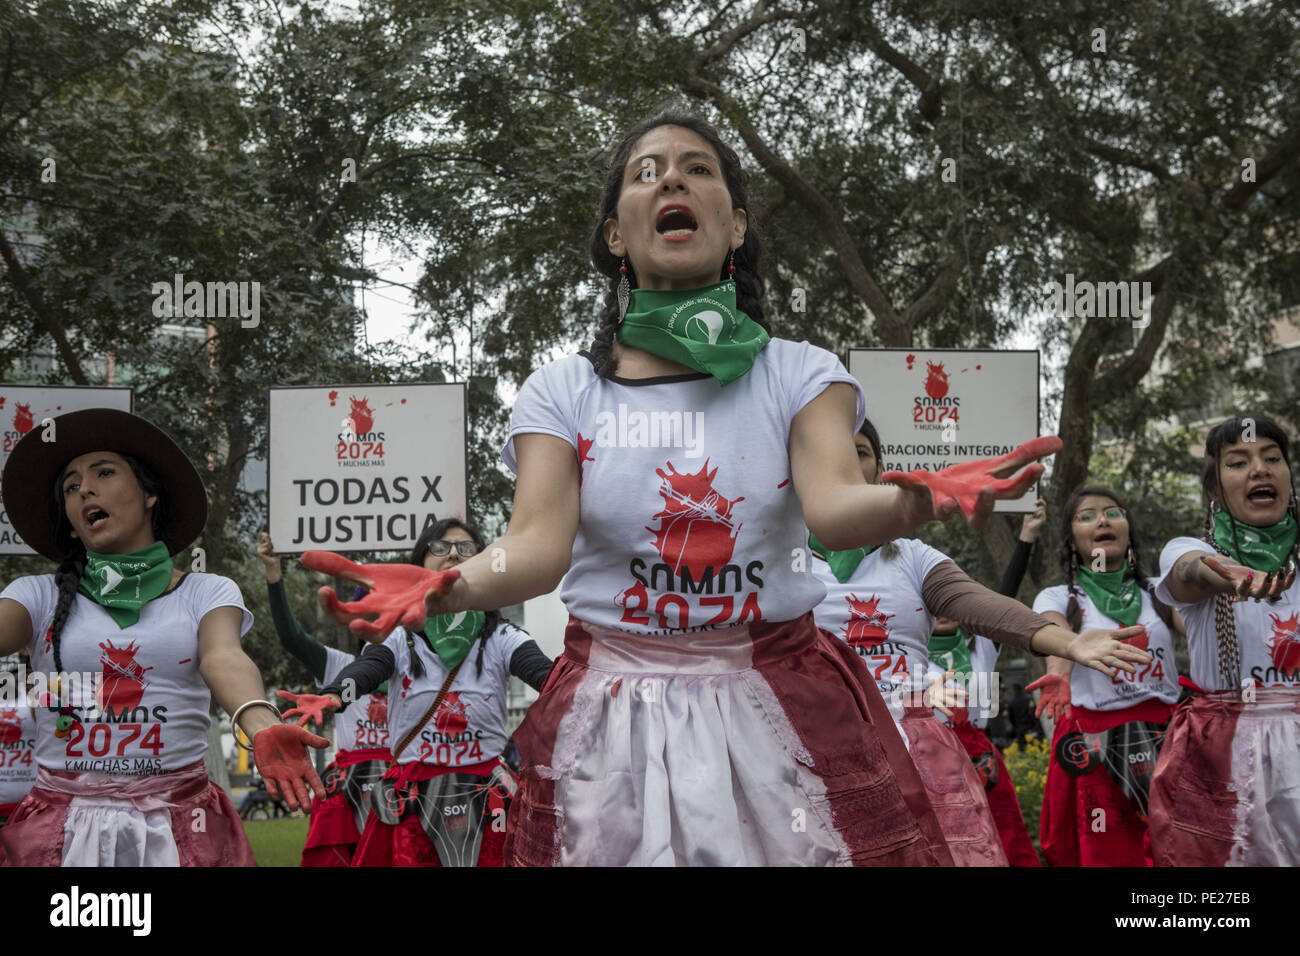 Lima, Peru. 11th Aug, 2018. Demonstrators shout slogans during a Ni Una Menos (Not One Less) rally in protest of gender based violence in Lima. Ni Una Menos (Not One Less) demands that women should be protected from violent deaths at the hands of men in Peru. Credit: Guillermo Gutierrez/SOPA Images/ZUMA Wire/Alamy Live News Stock Photo